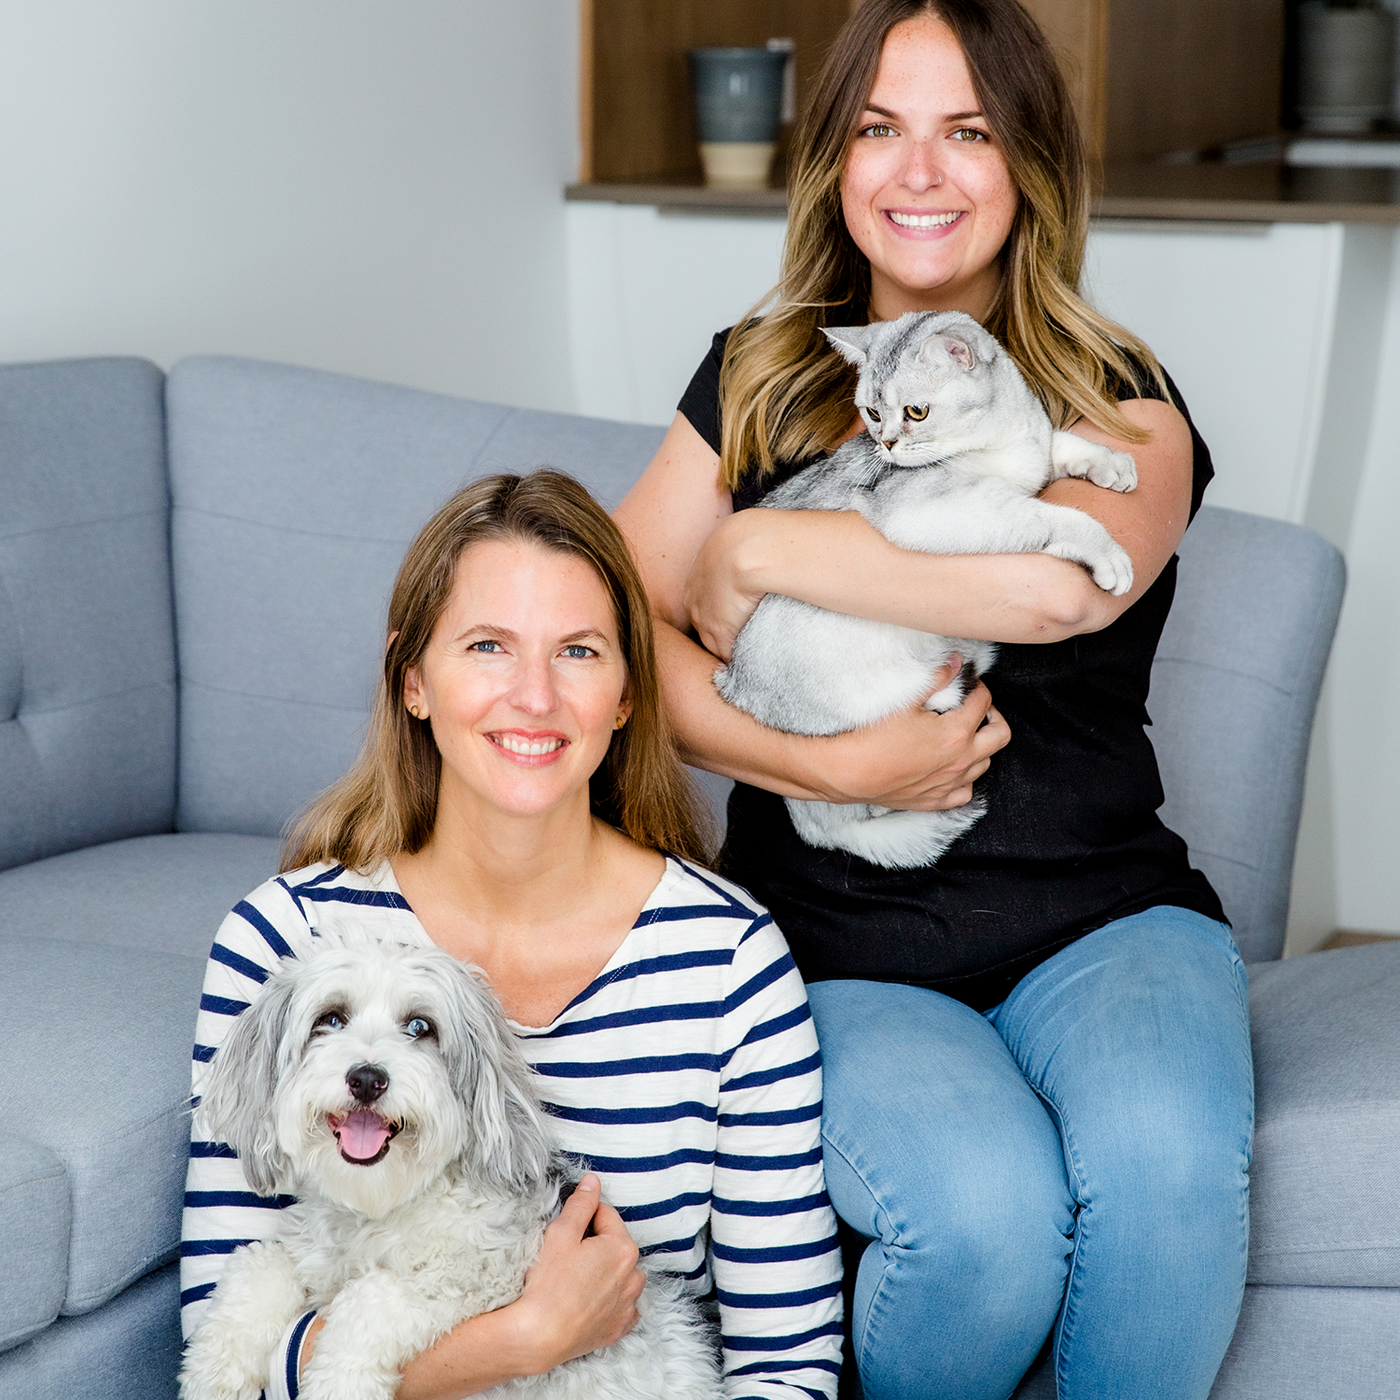 Jen and Laura holding their pet dog and cat